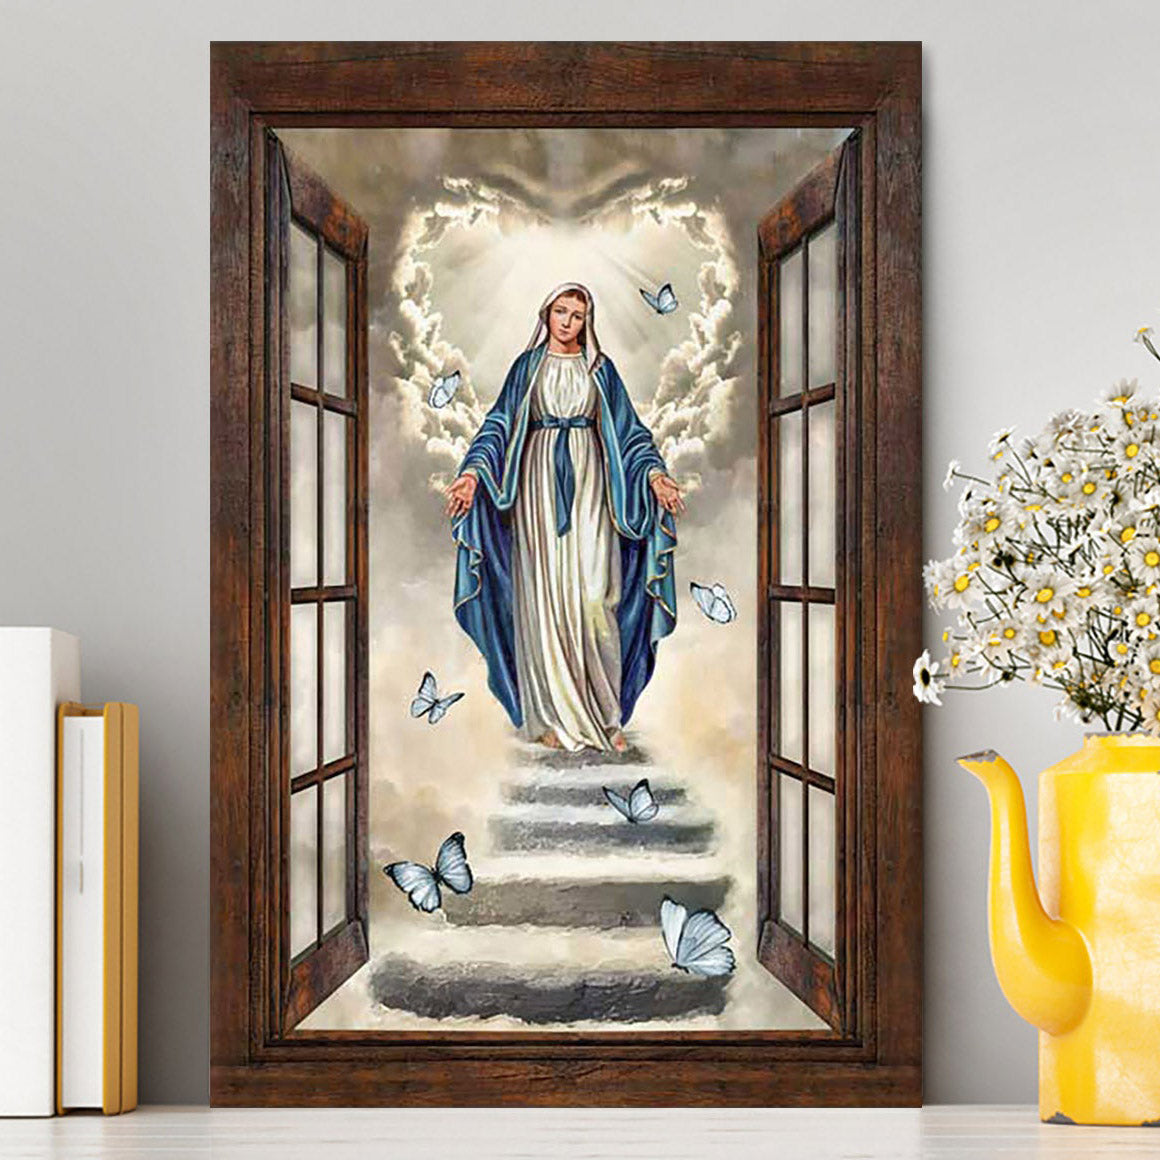 Maria Blue Butterfly Vintage Window The Way To Heaven Canvas Print - Inspirational Canvas Art - Christian Wall Art Home Decor